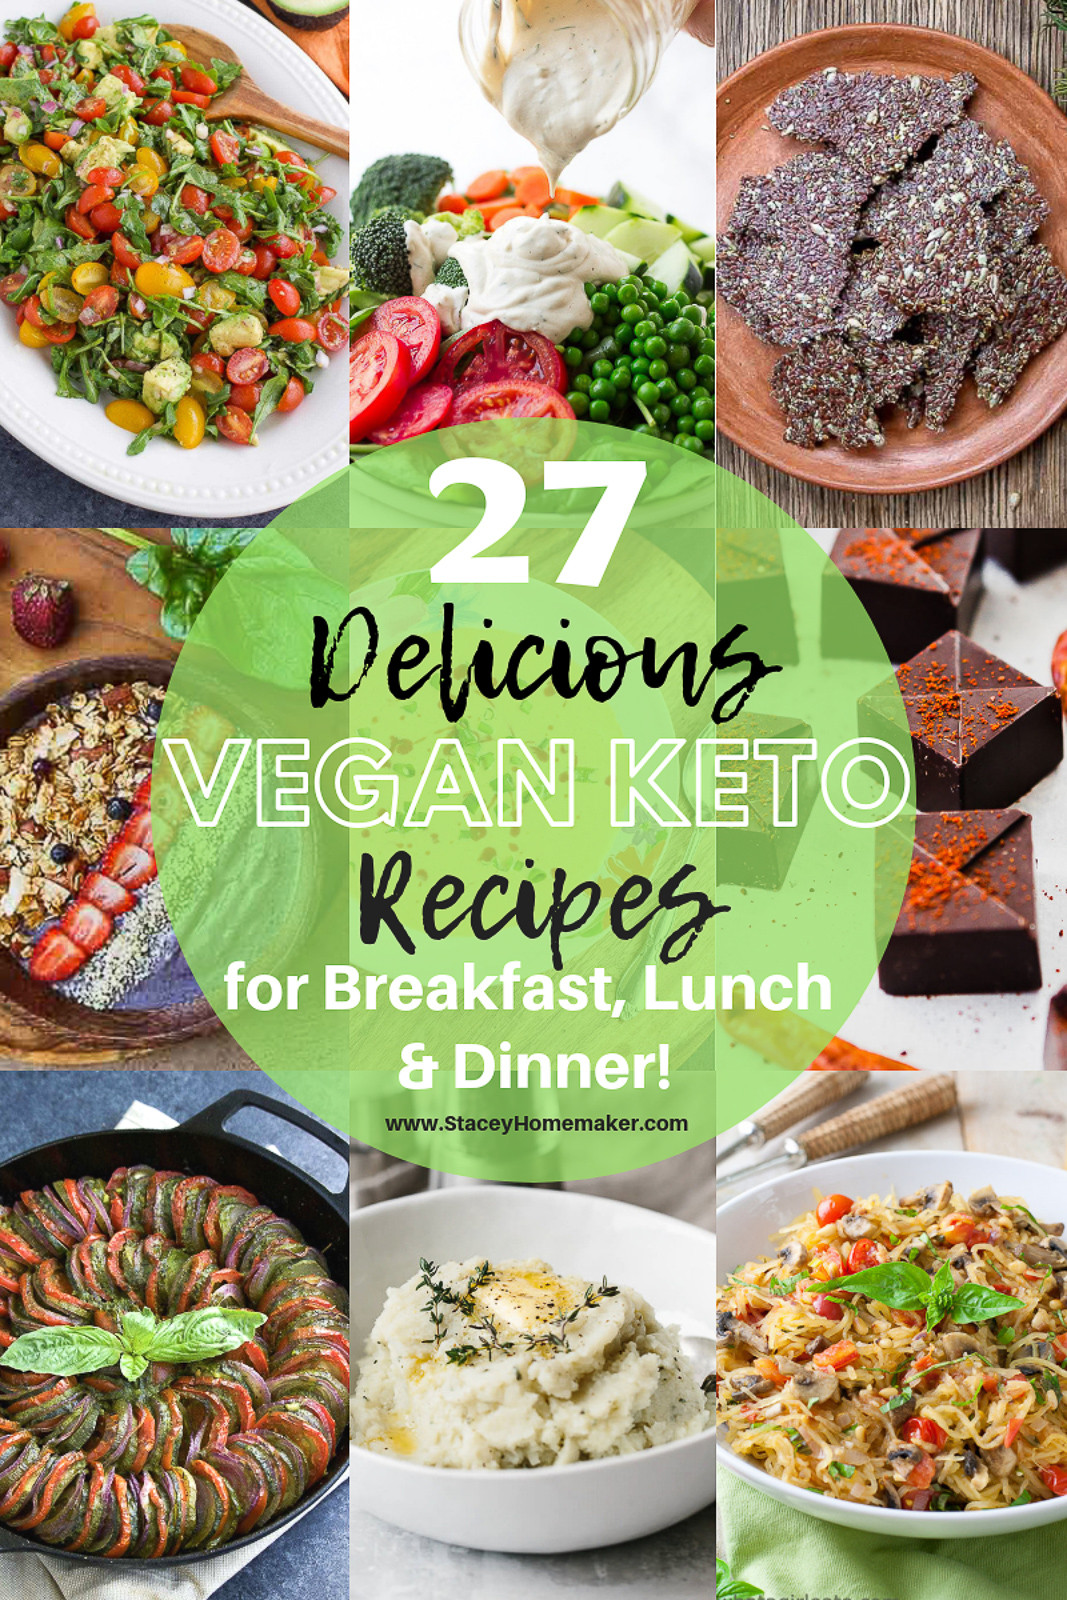 Keto Diet Recipes Breakfast Dinners
 27 Delicious Vegan Keto Recipes For Breakfast Lunch & Dinner